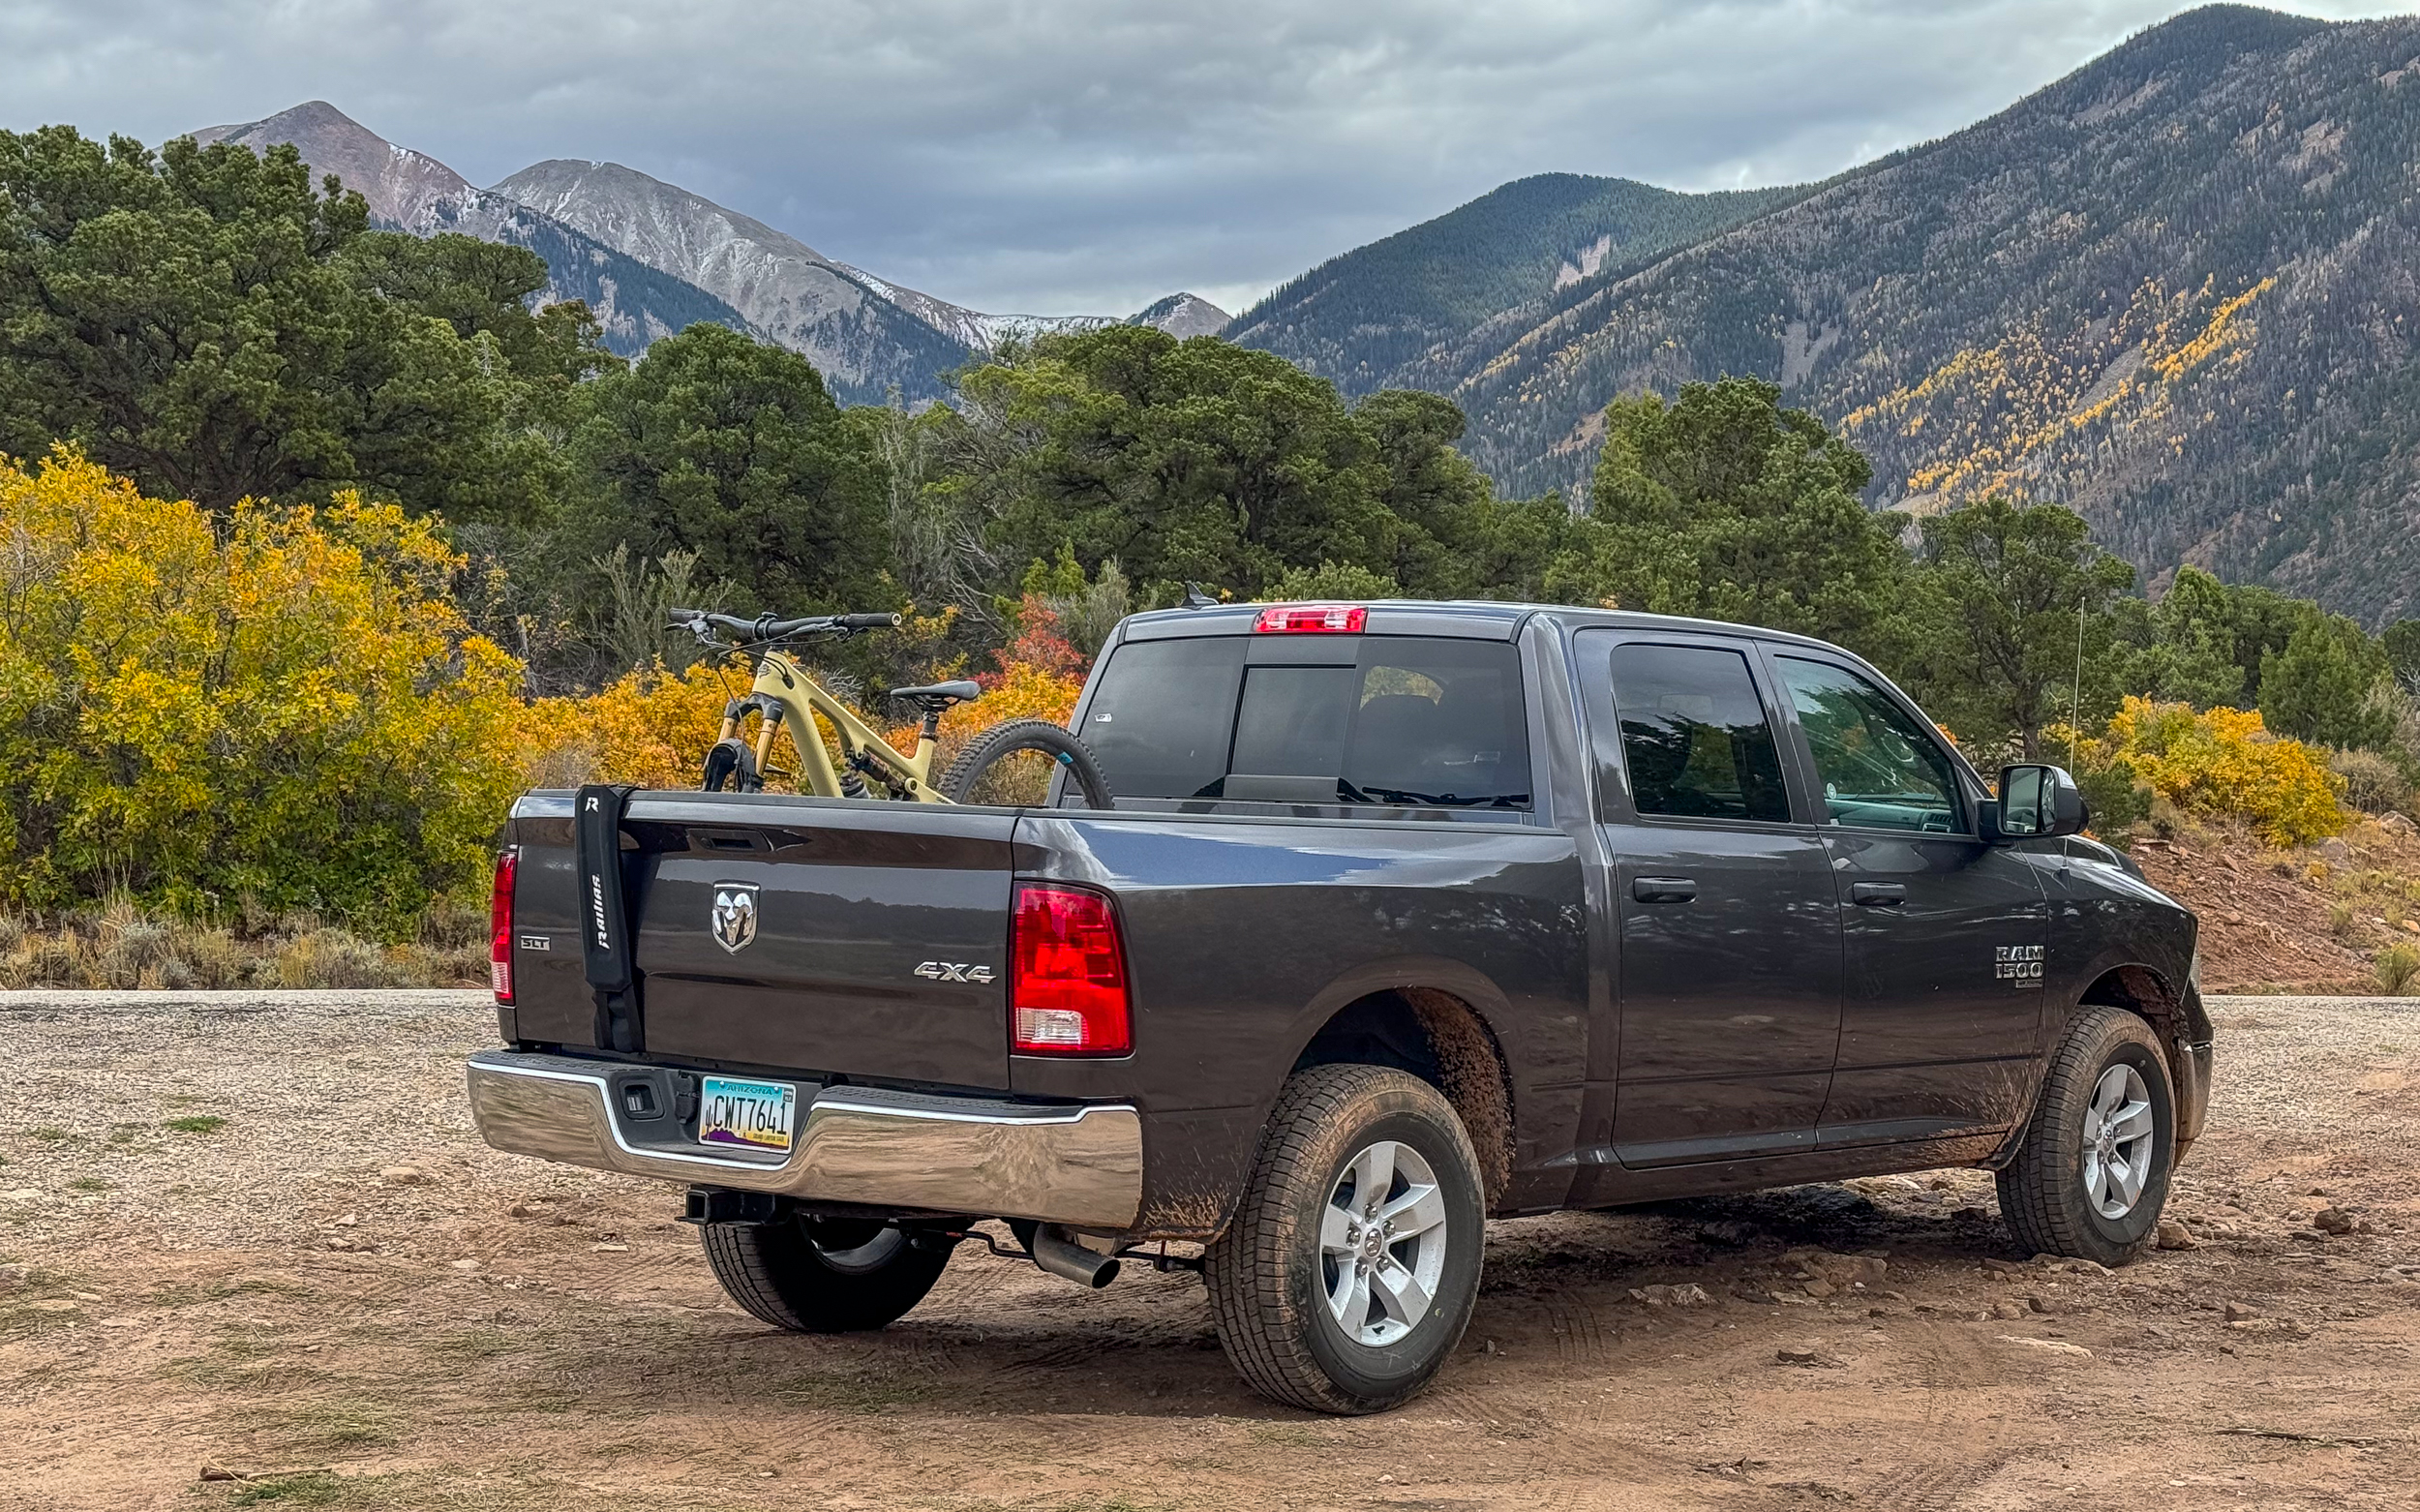 More than a Bike Rack: Railias Tailgate Rack System Doubles as Tailgate Hangout, Storage & More